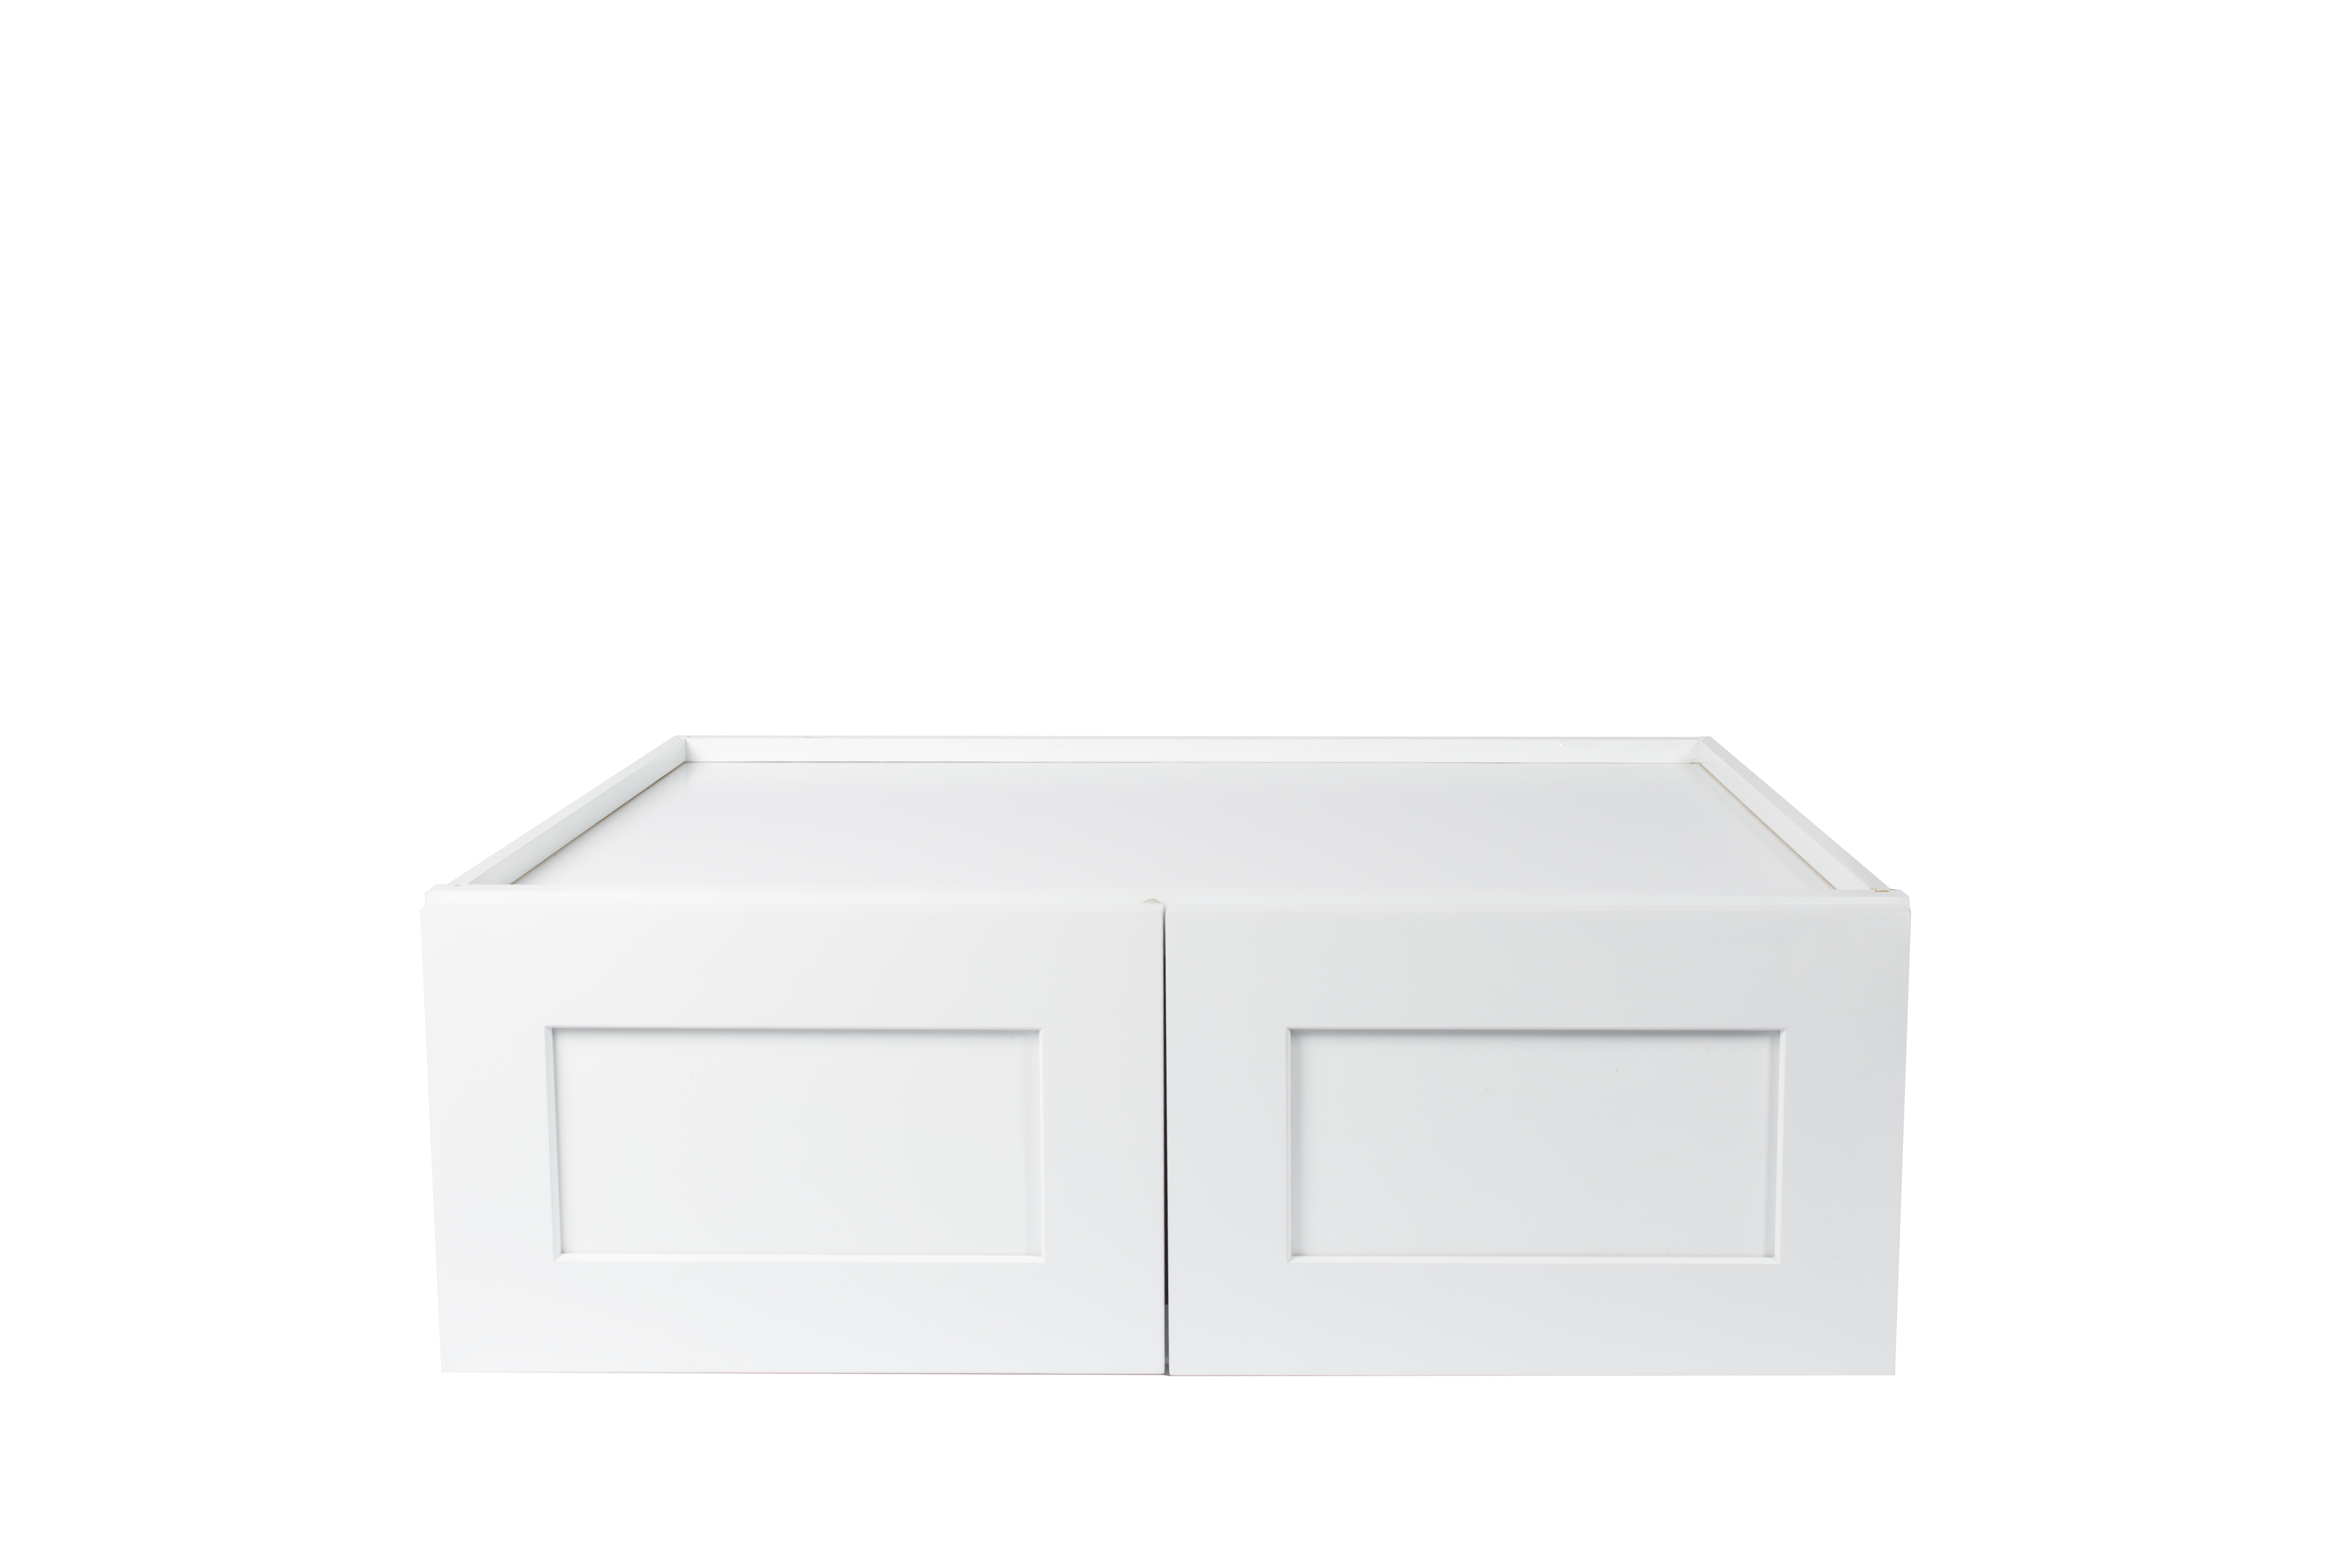 Ready to Assemble 30x15x24 in. Shaker High Double Door Wall Cabinet in White